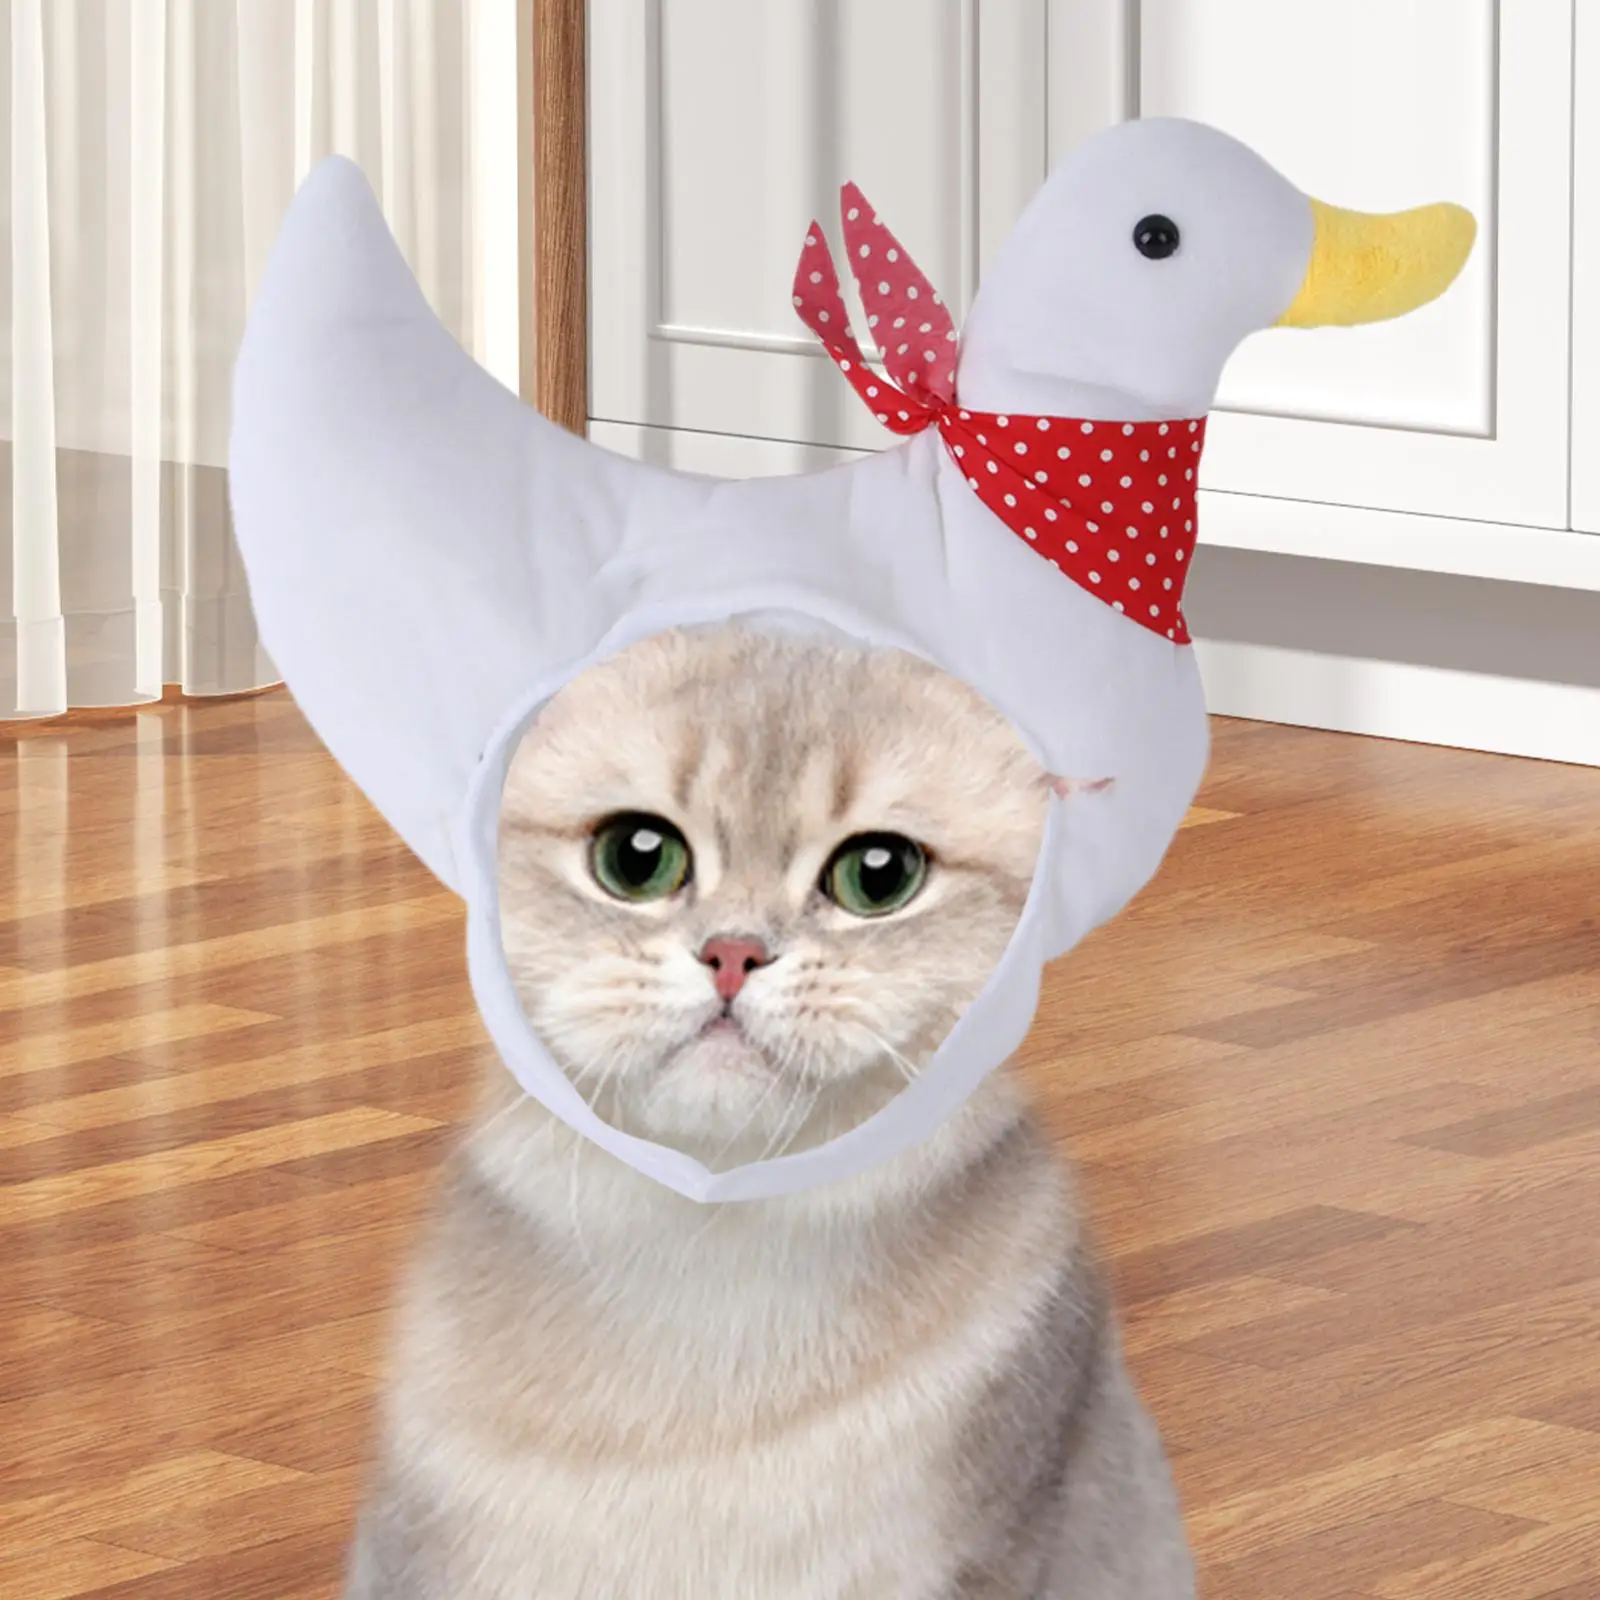 Duck Shape Pet Hat Costumes Kitten Outfits Soft Kitten Hat for Puppy Cat Small Puppy Dogs Holiday Party Birthday Halloween